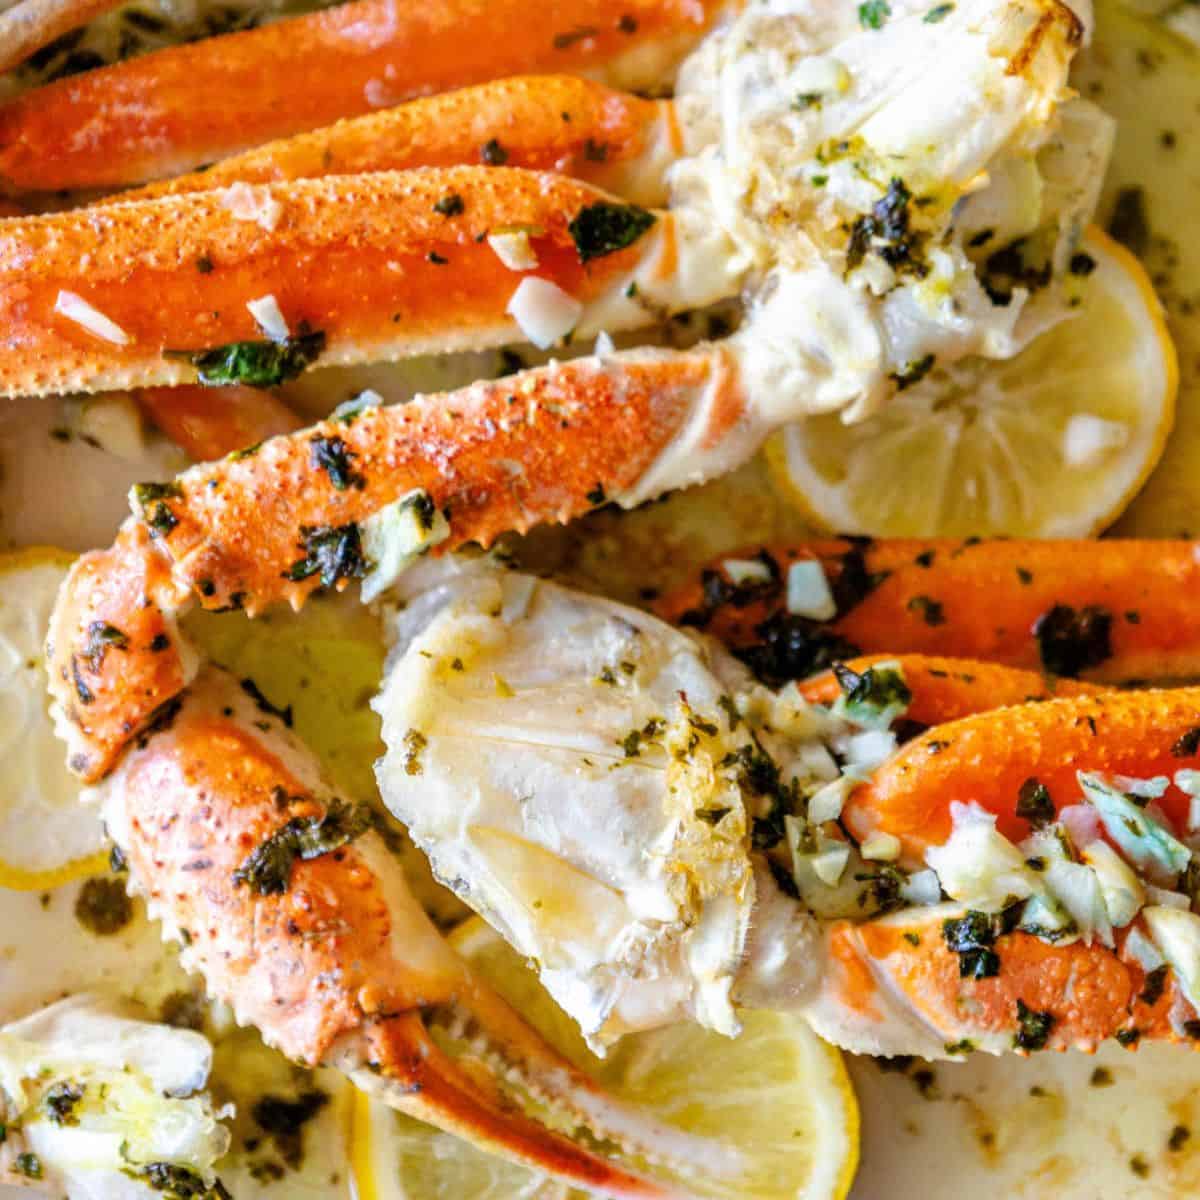 Crab legs with lemon and herbs on a plate.